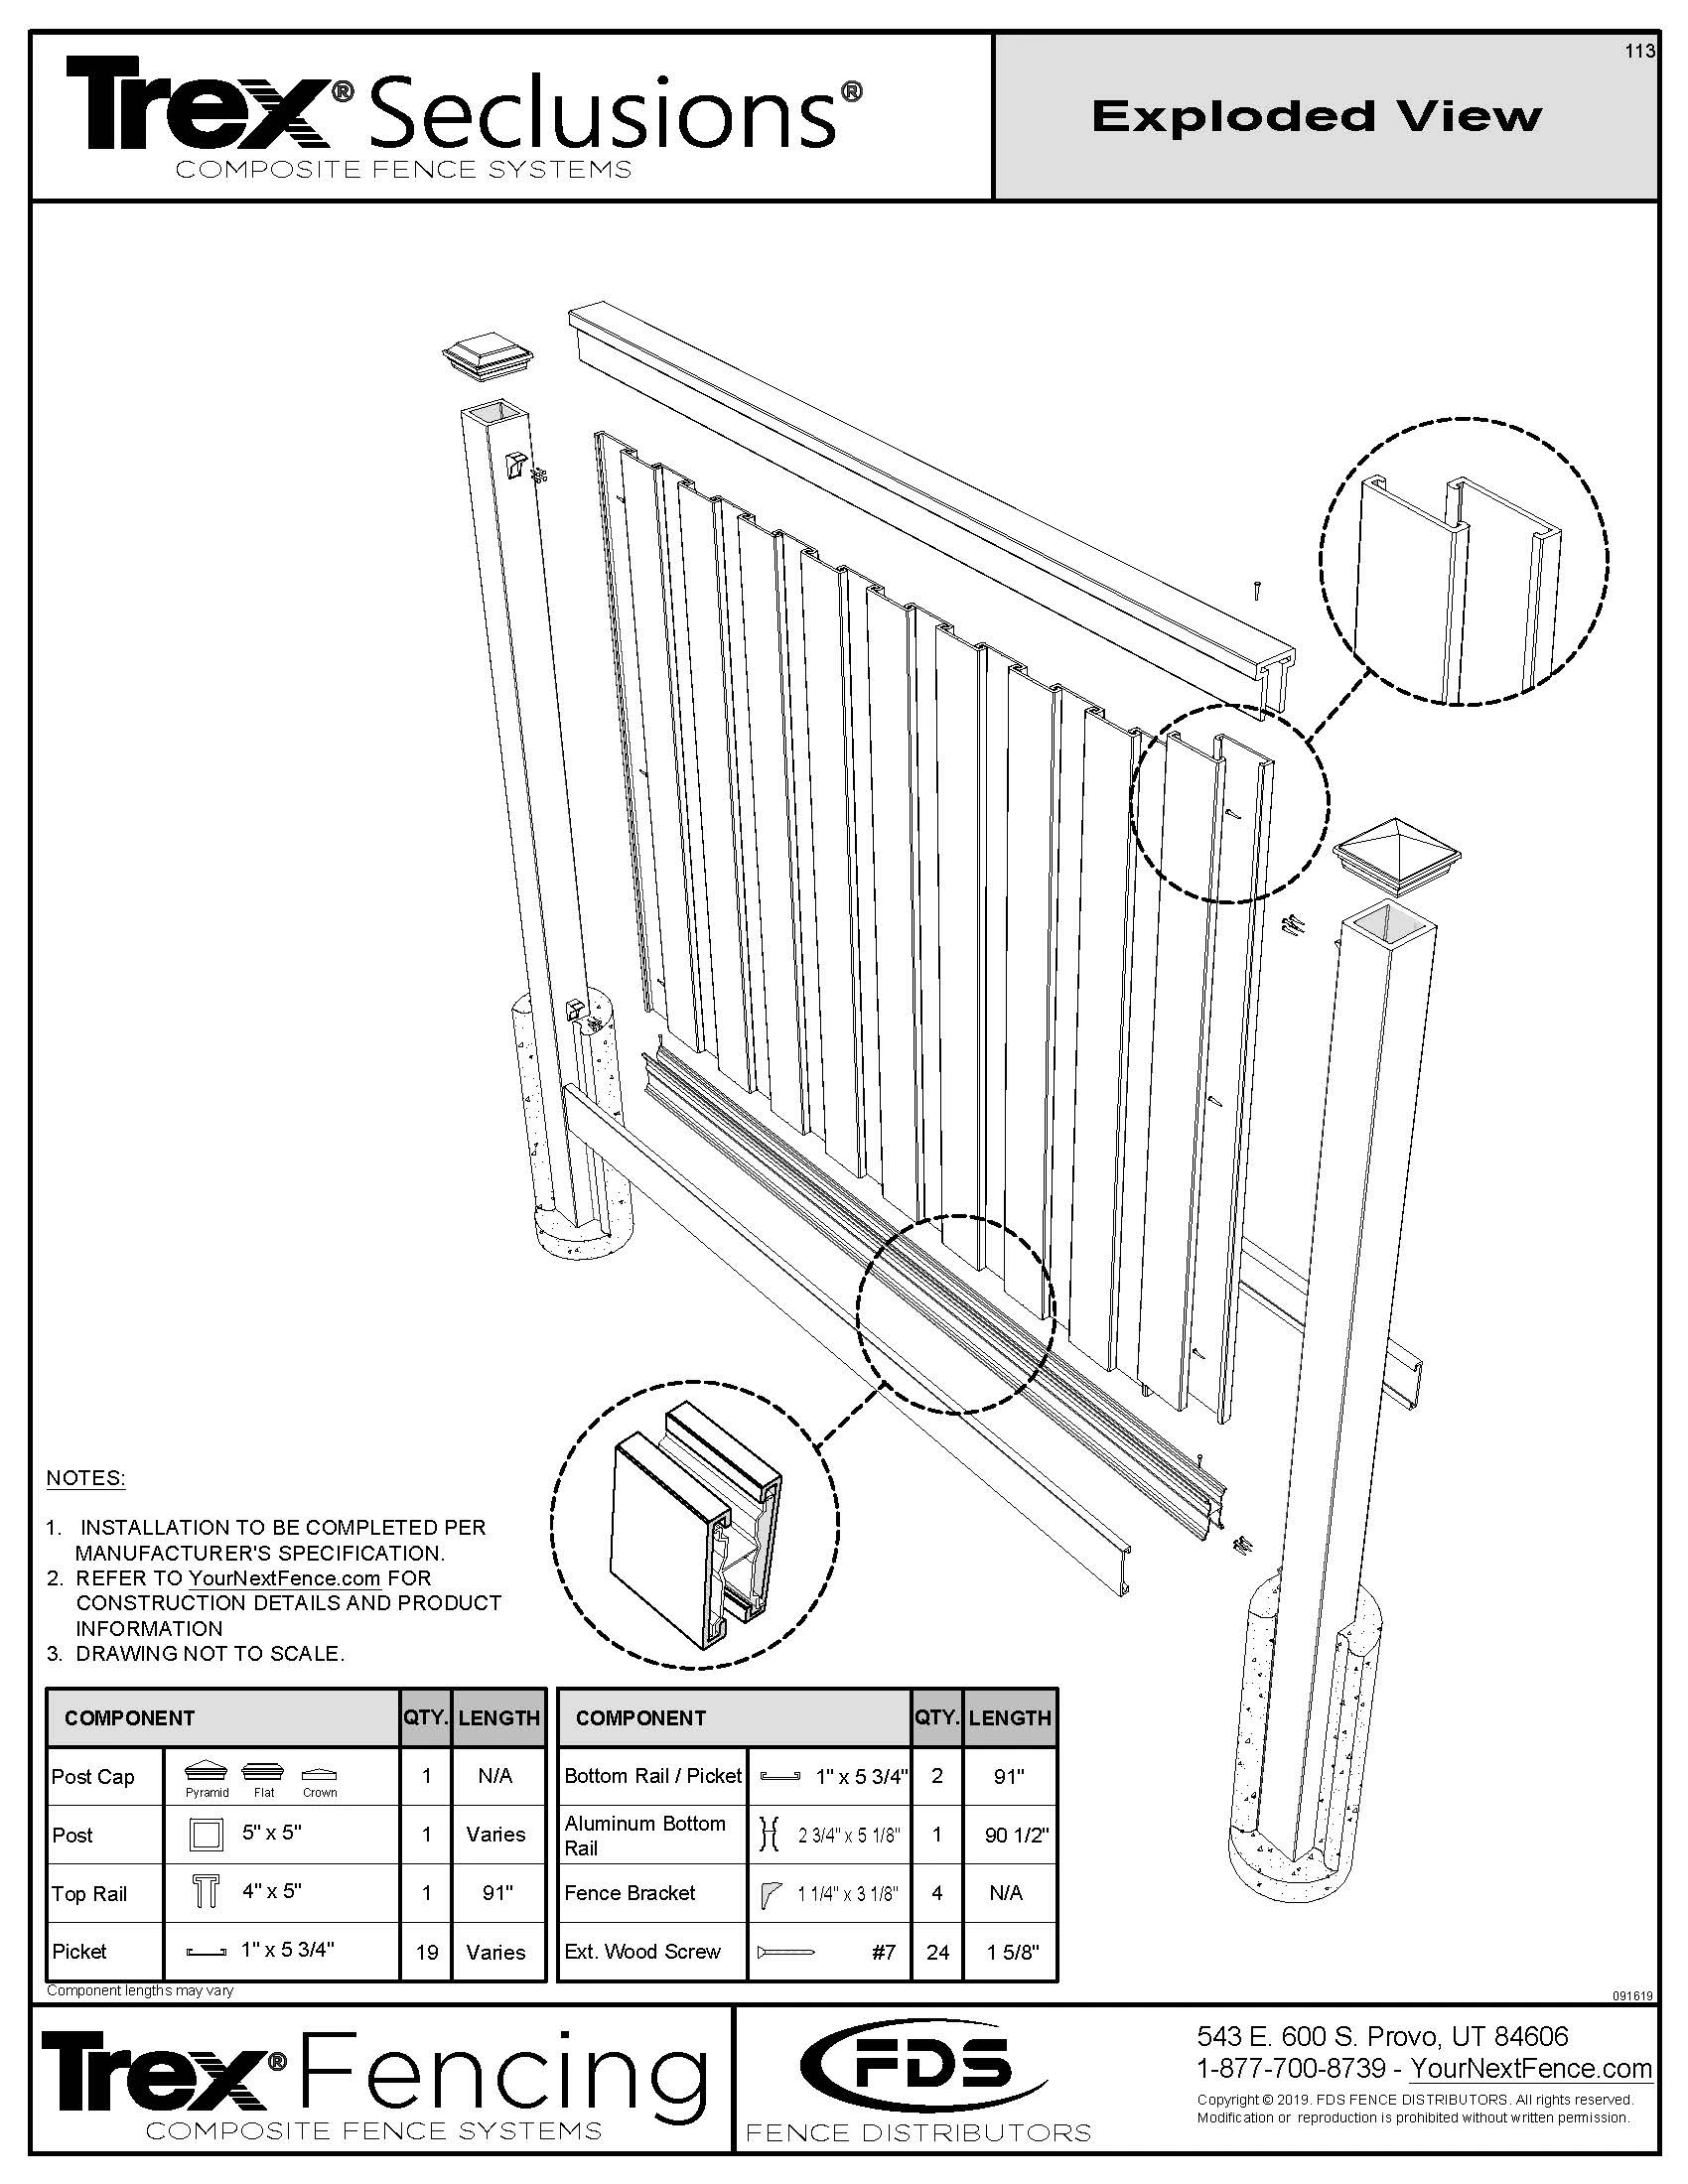 Trex Seclusions Fence Panel Kit - 2-ft. Tall (Wall Topper) 11